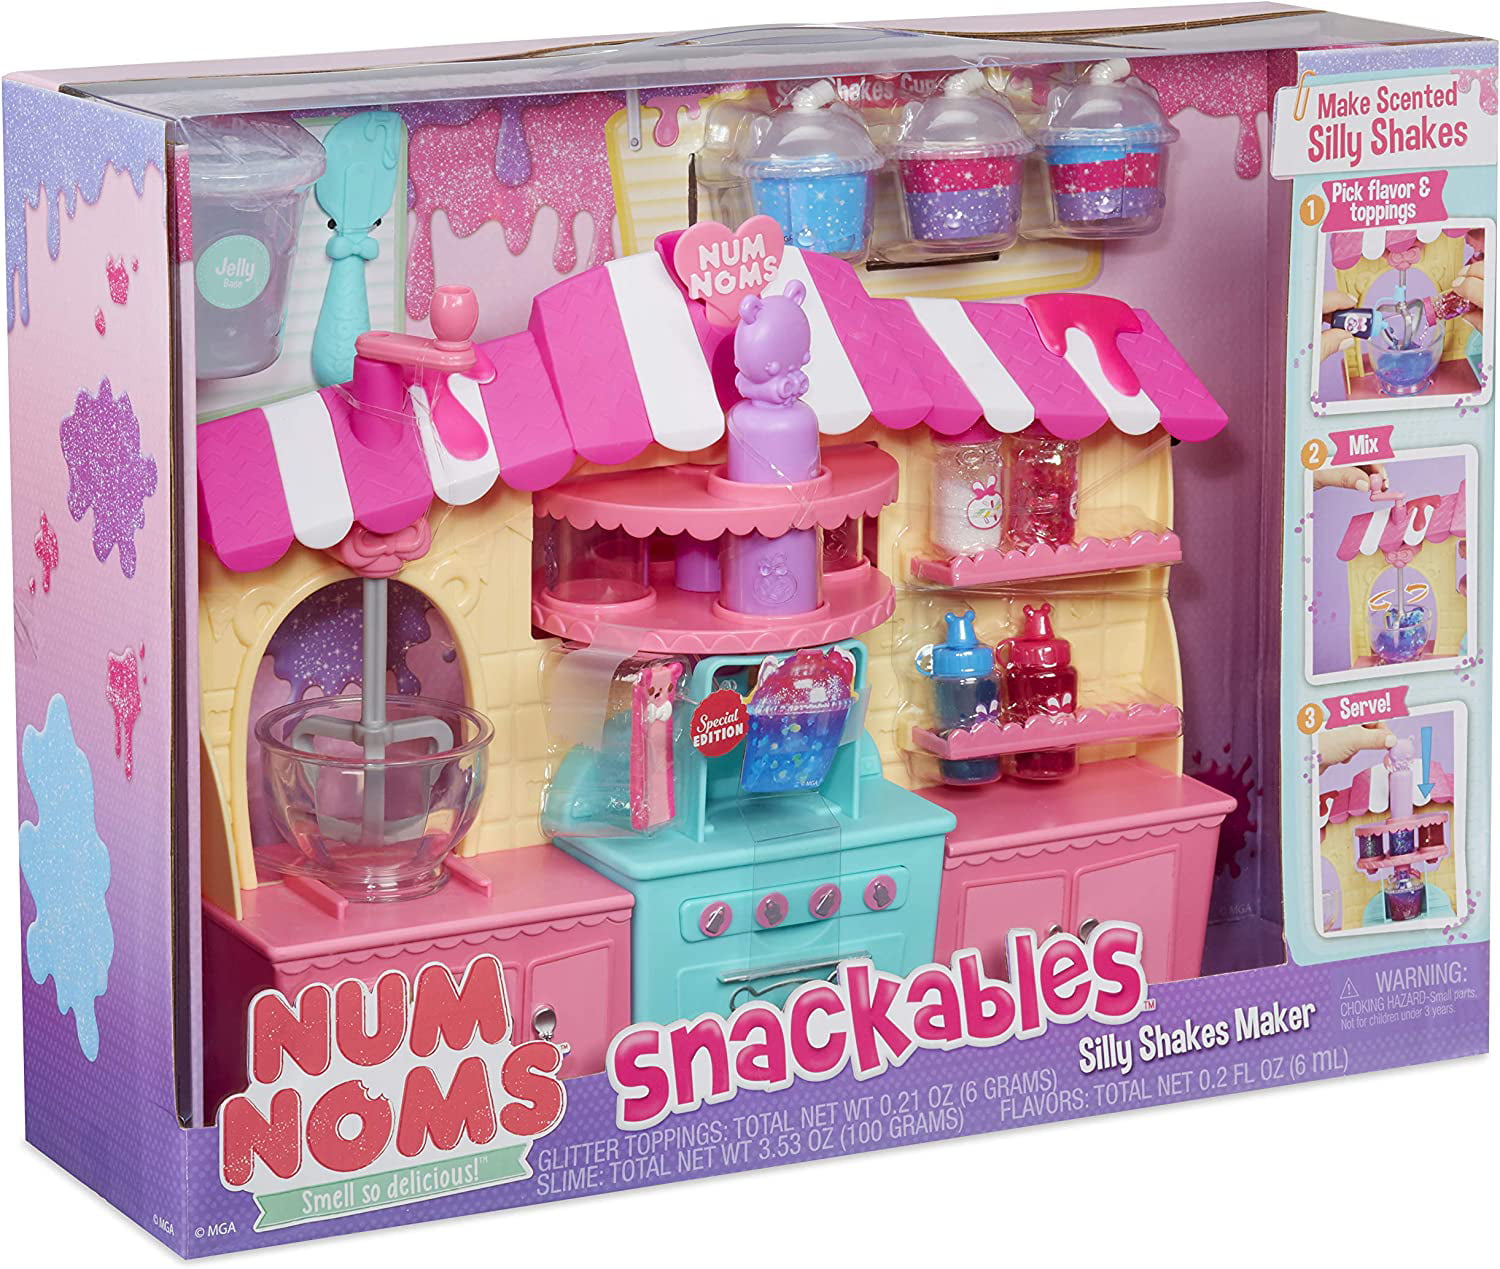  Num Noms 554370 Snackables Silly Shakes- Neapolitan Shake,  Multicolor : Toys & Games